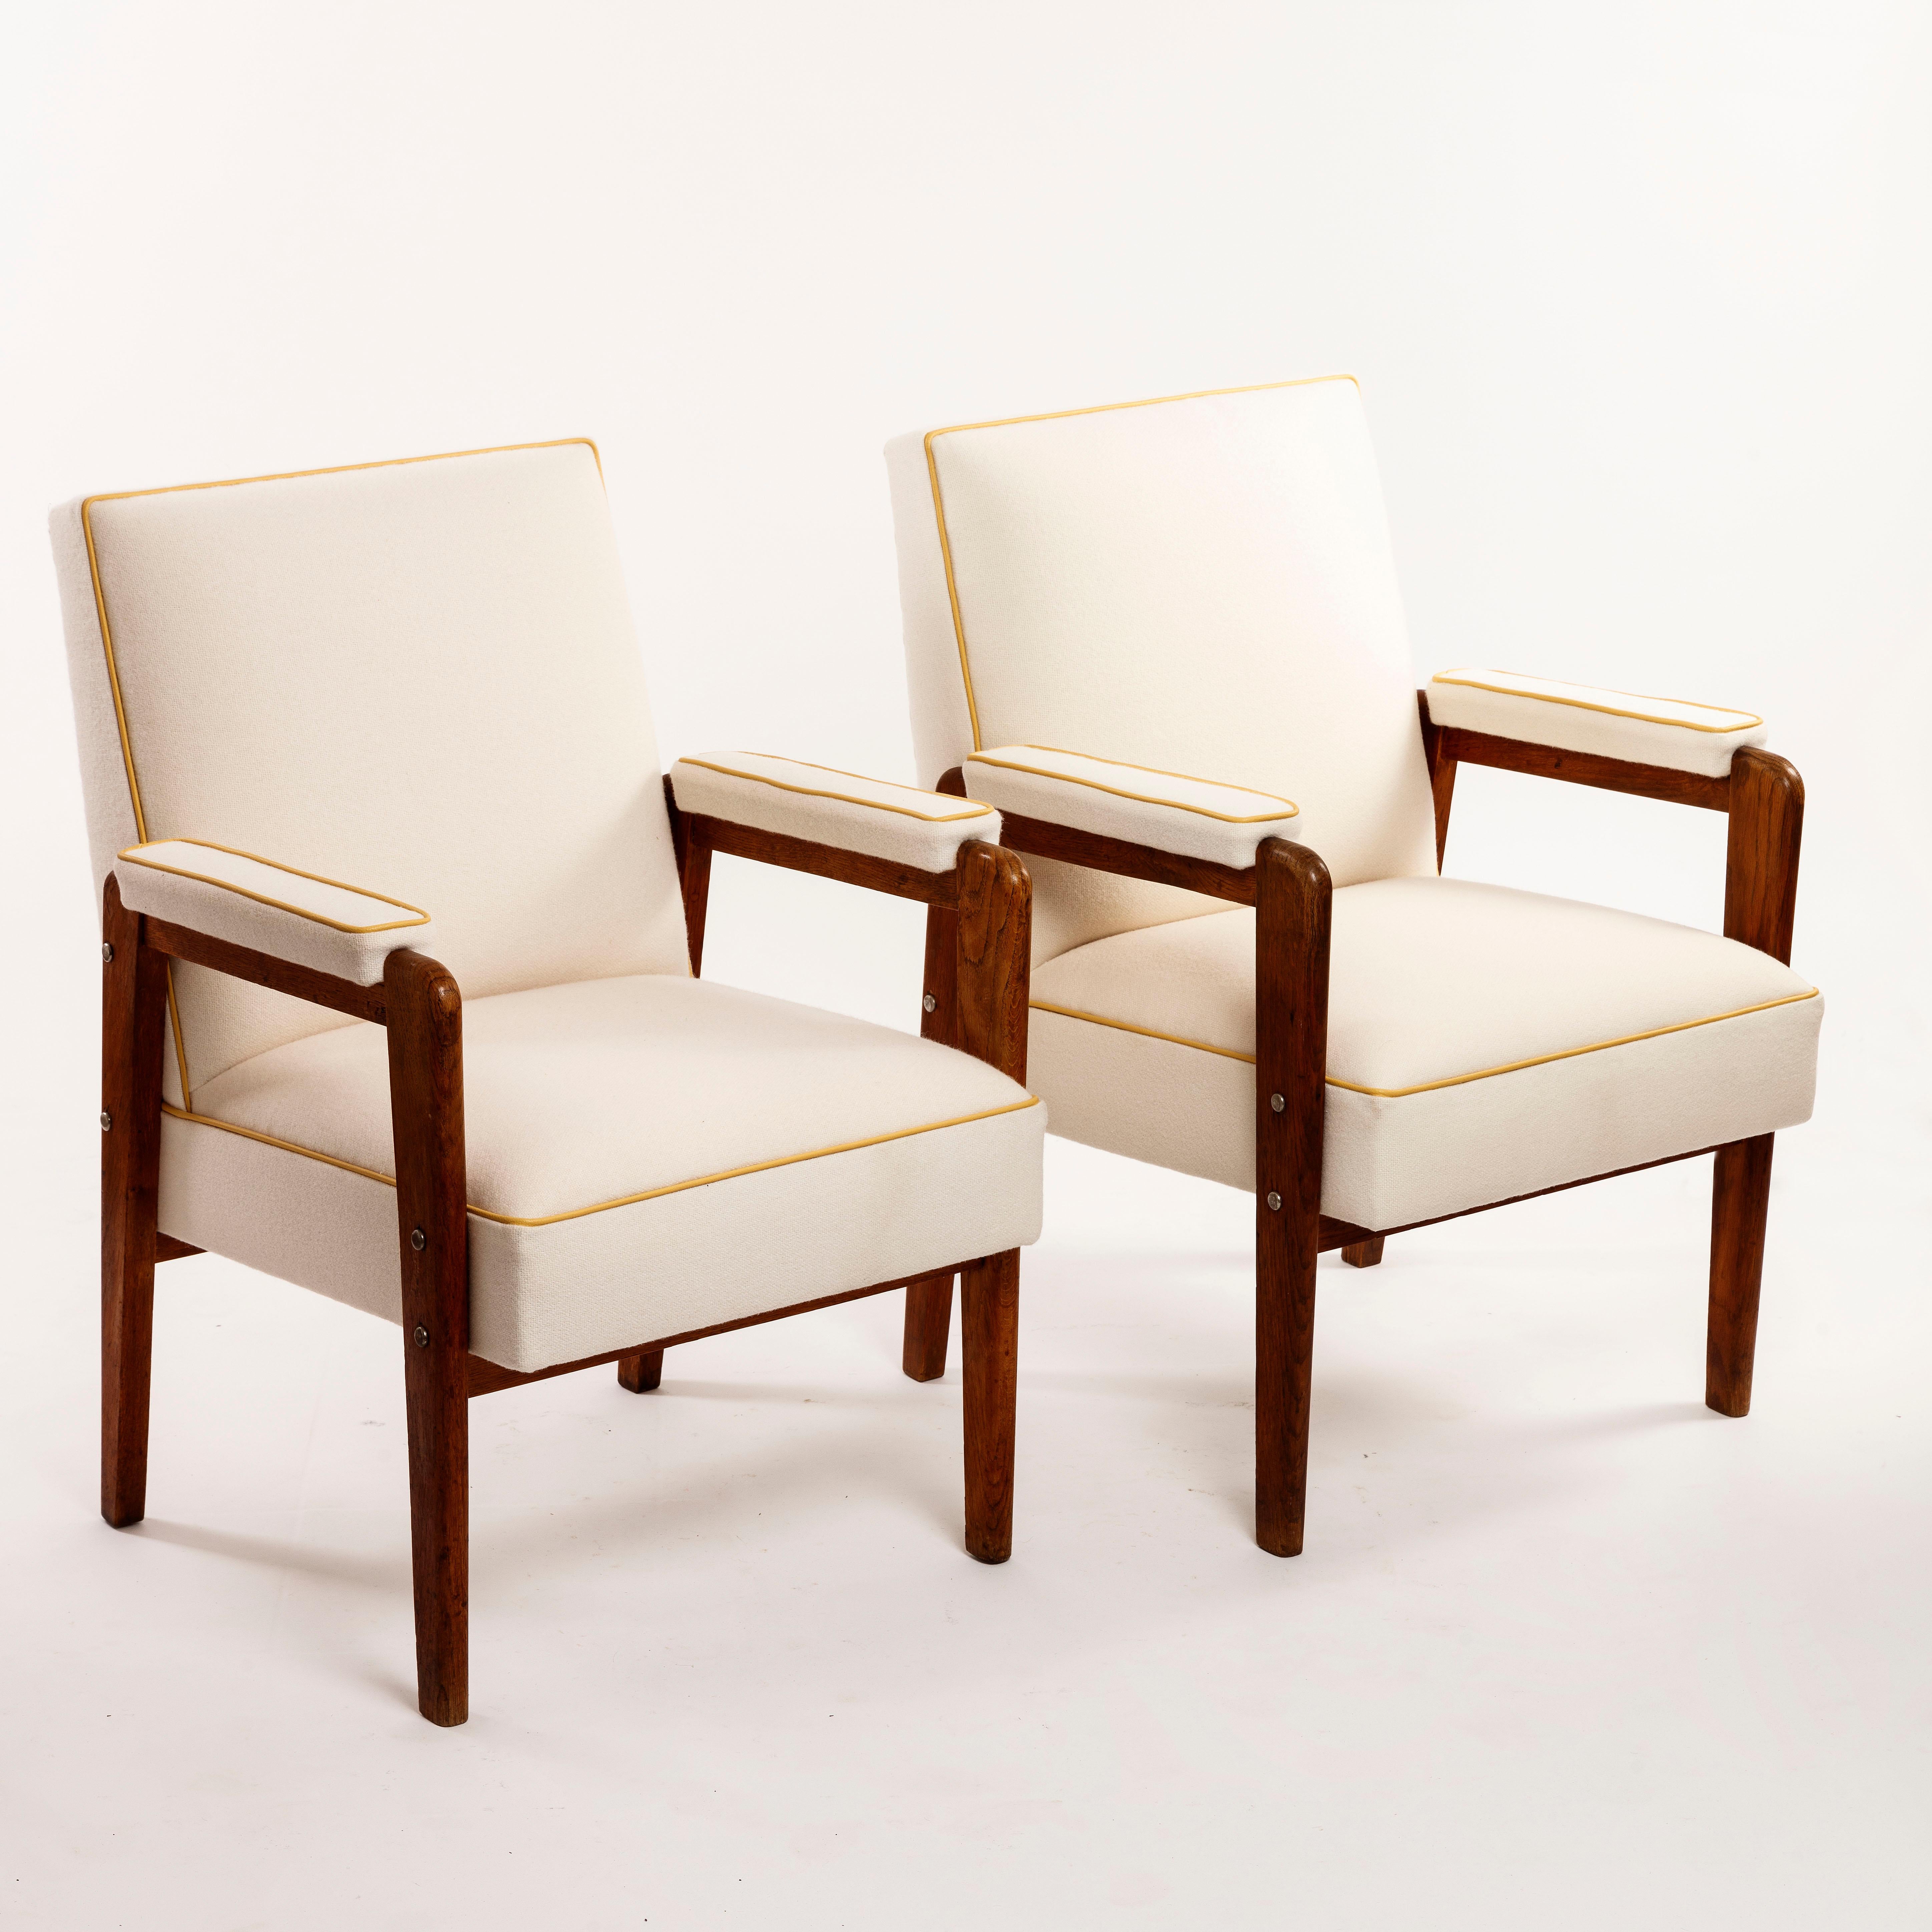 Marcel Gascoin Armchair Created in 1950 for the Cité Universitaire Antony France For Sale 8